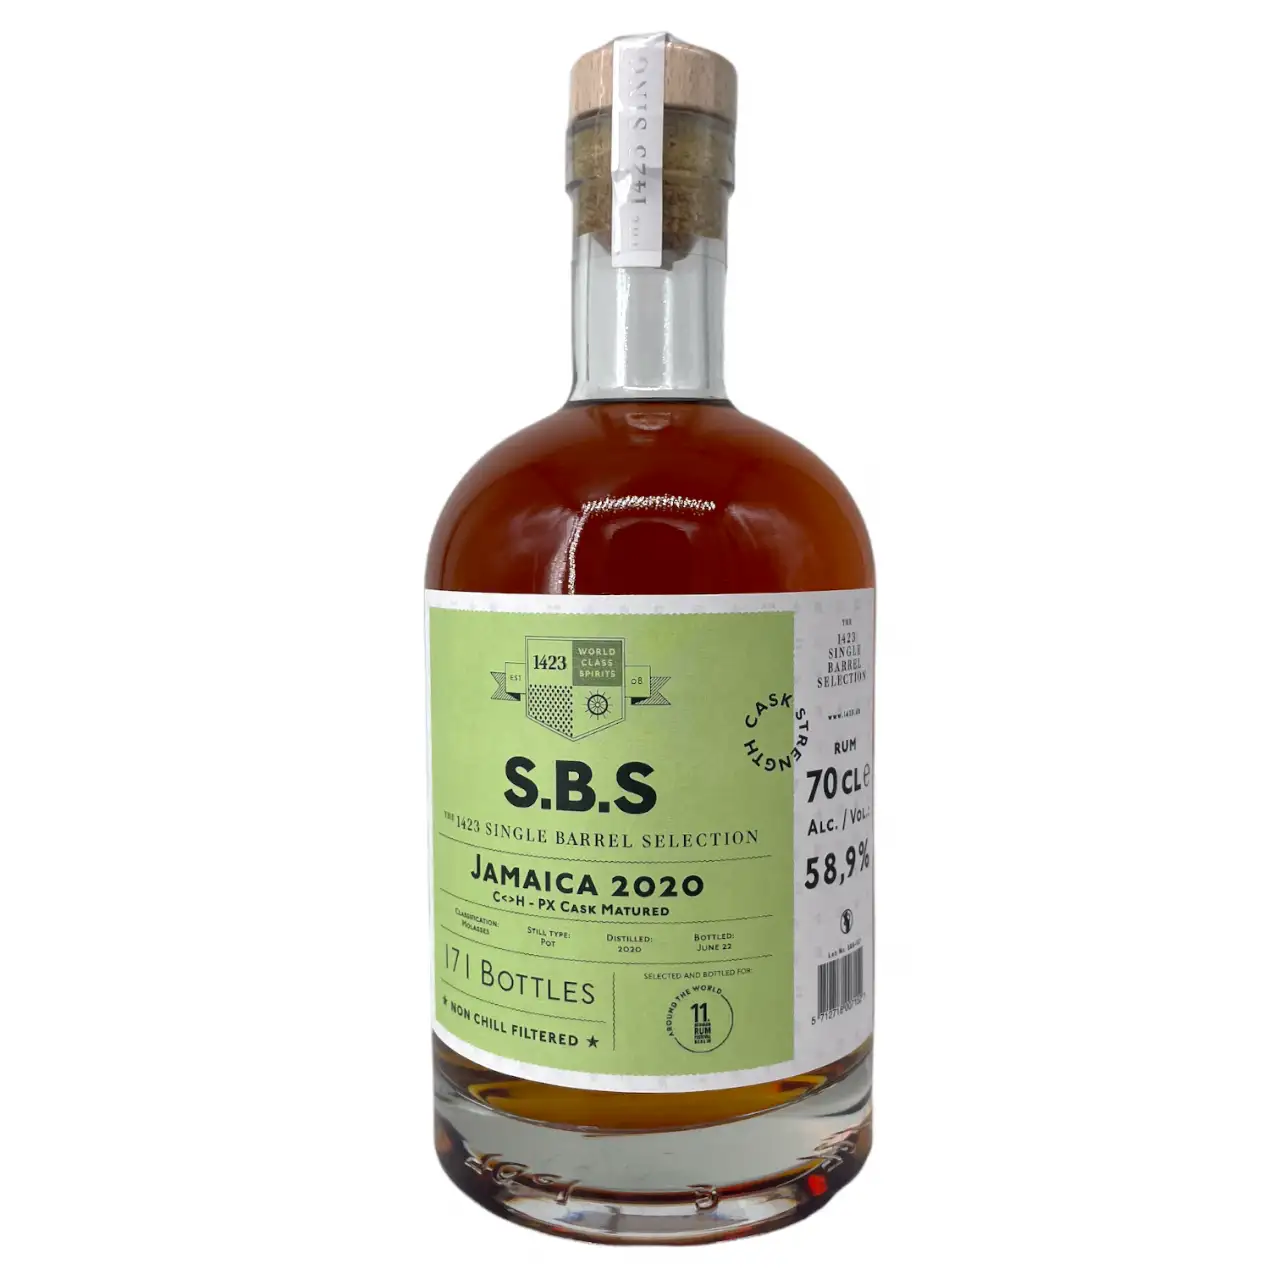 Image of the front of the bottle of the rum S.B.S Jamaica (11. German Rum Festival) C<>H